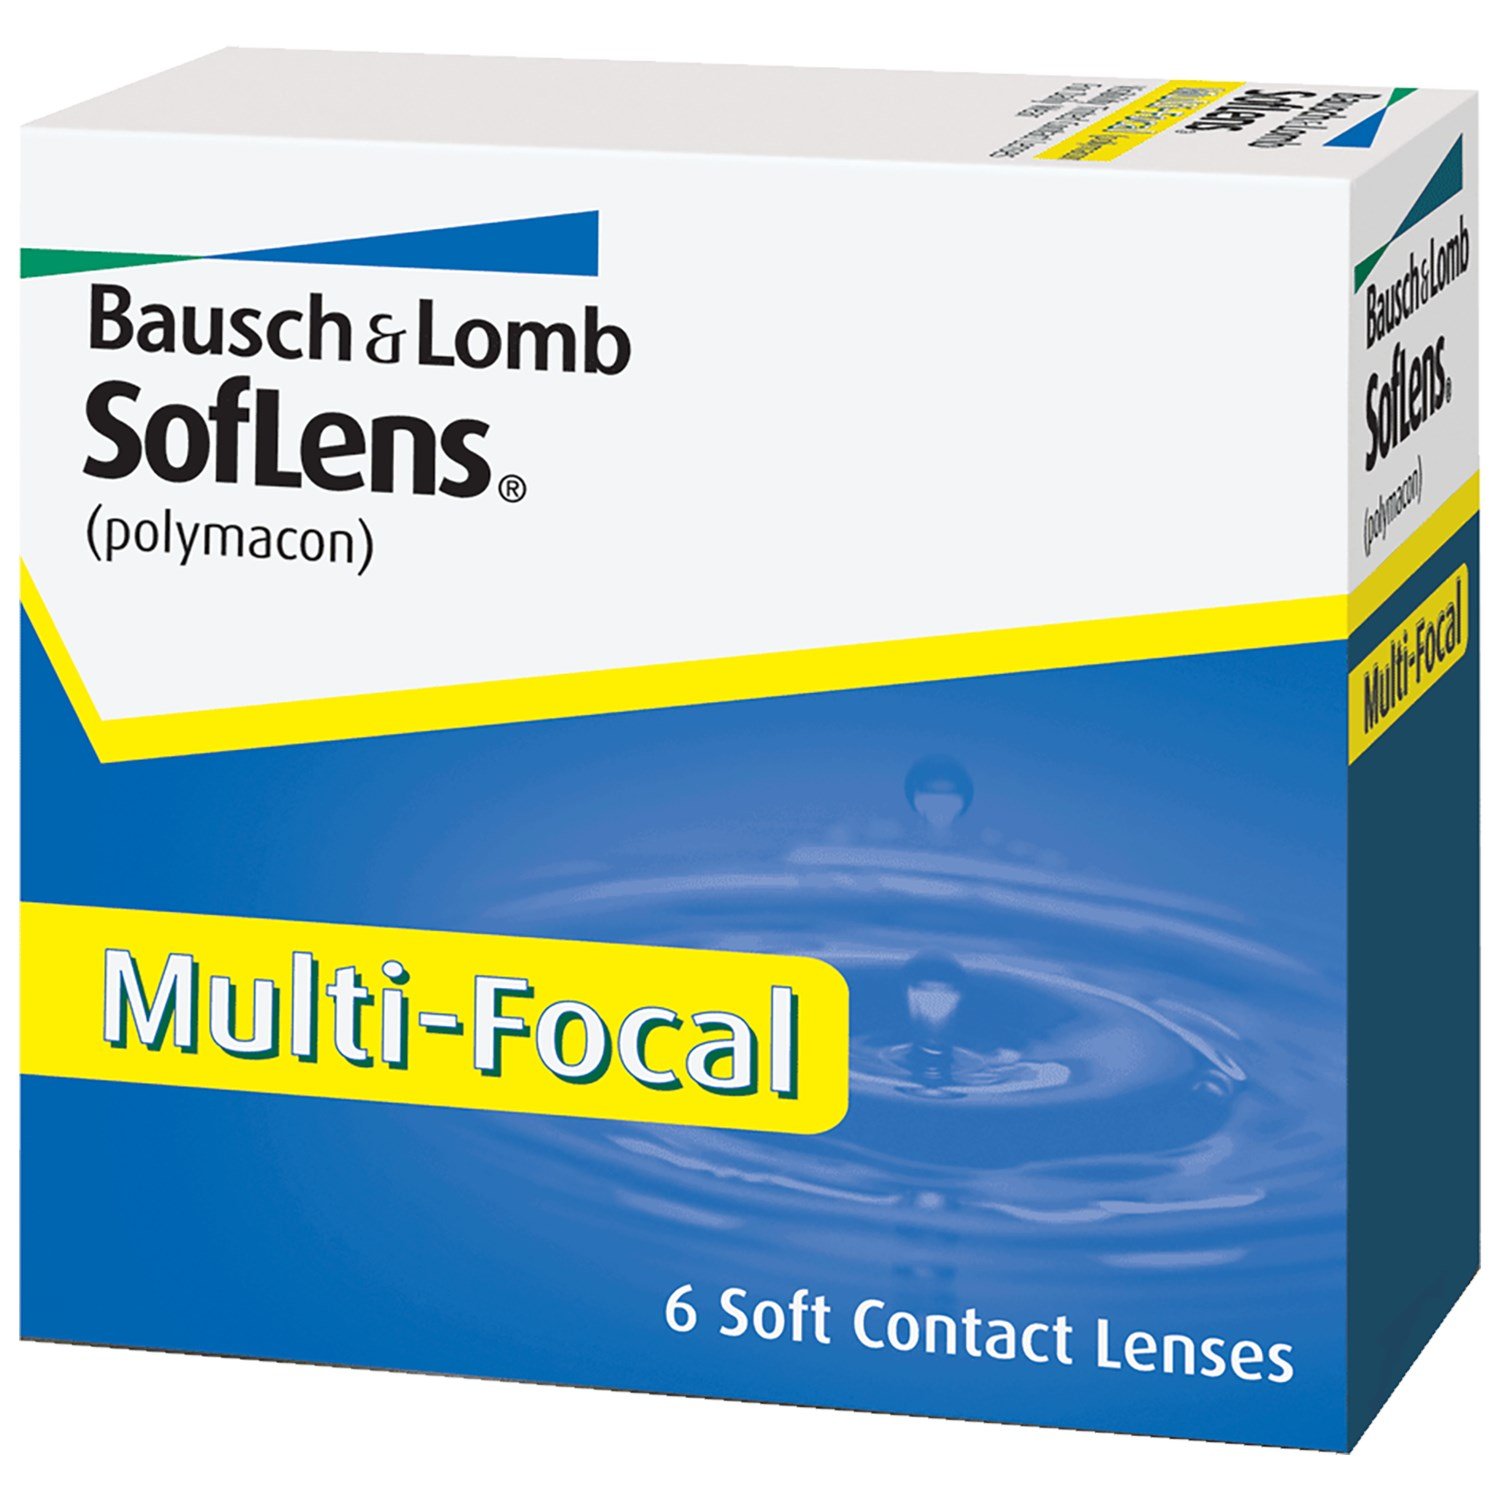 SofLens Multi-Focal contact lenses